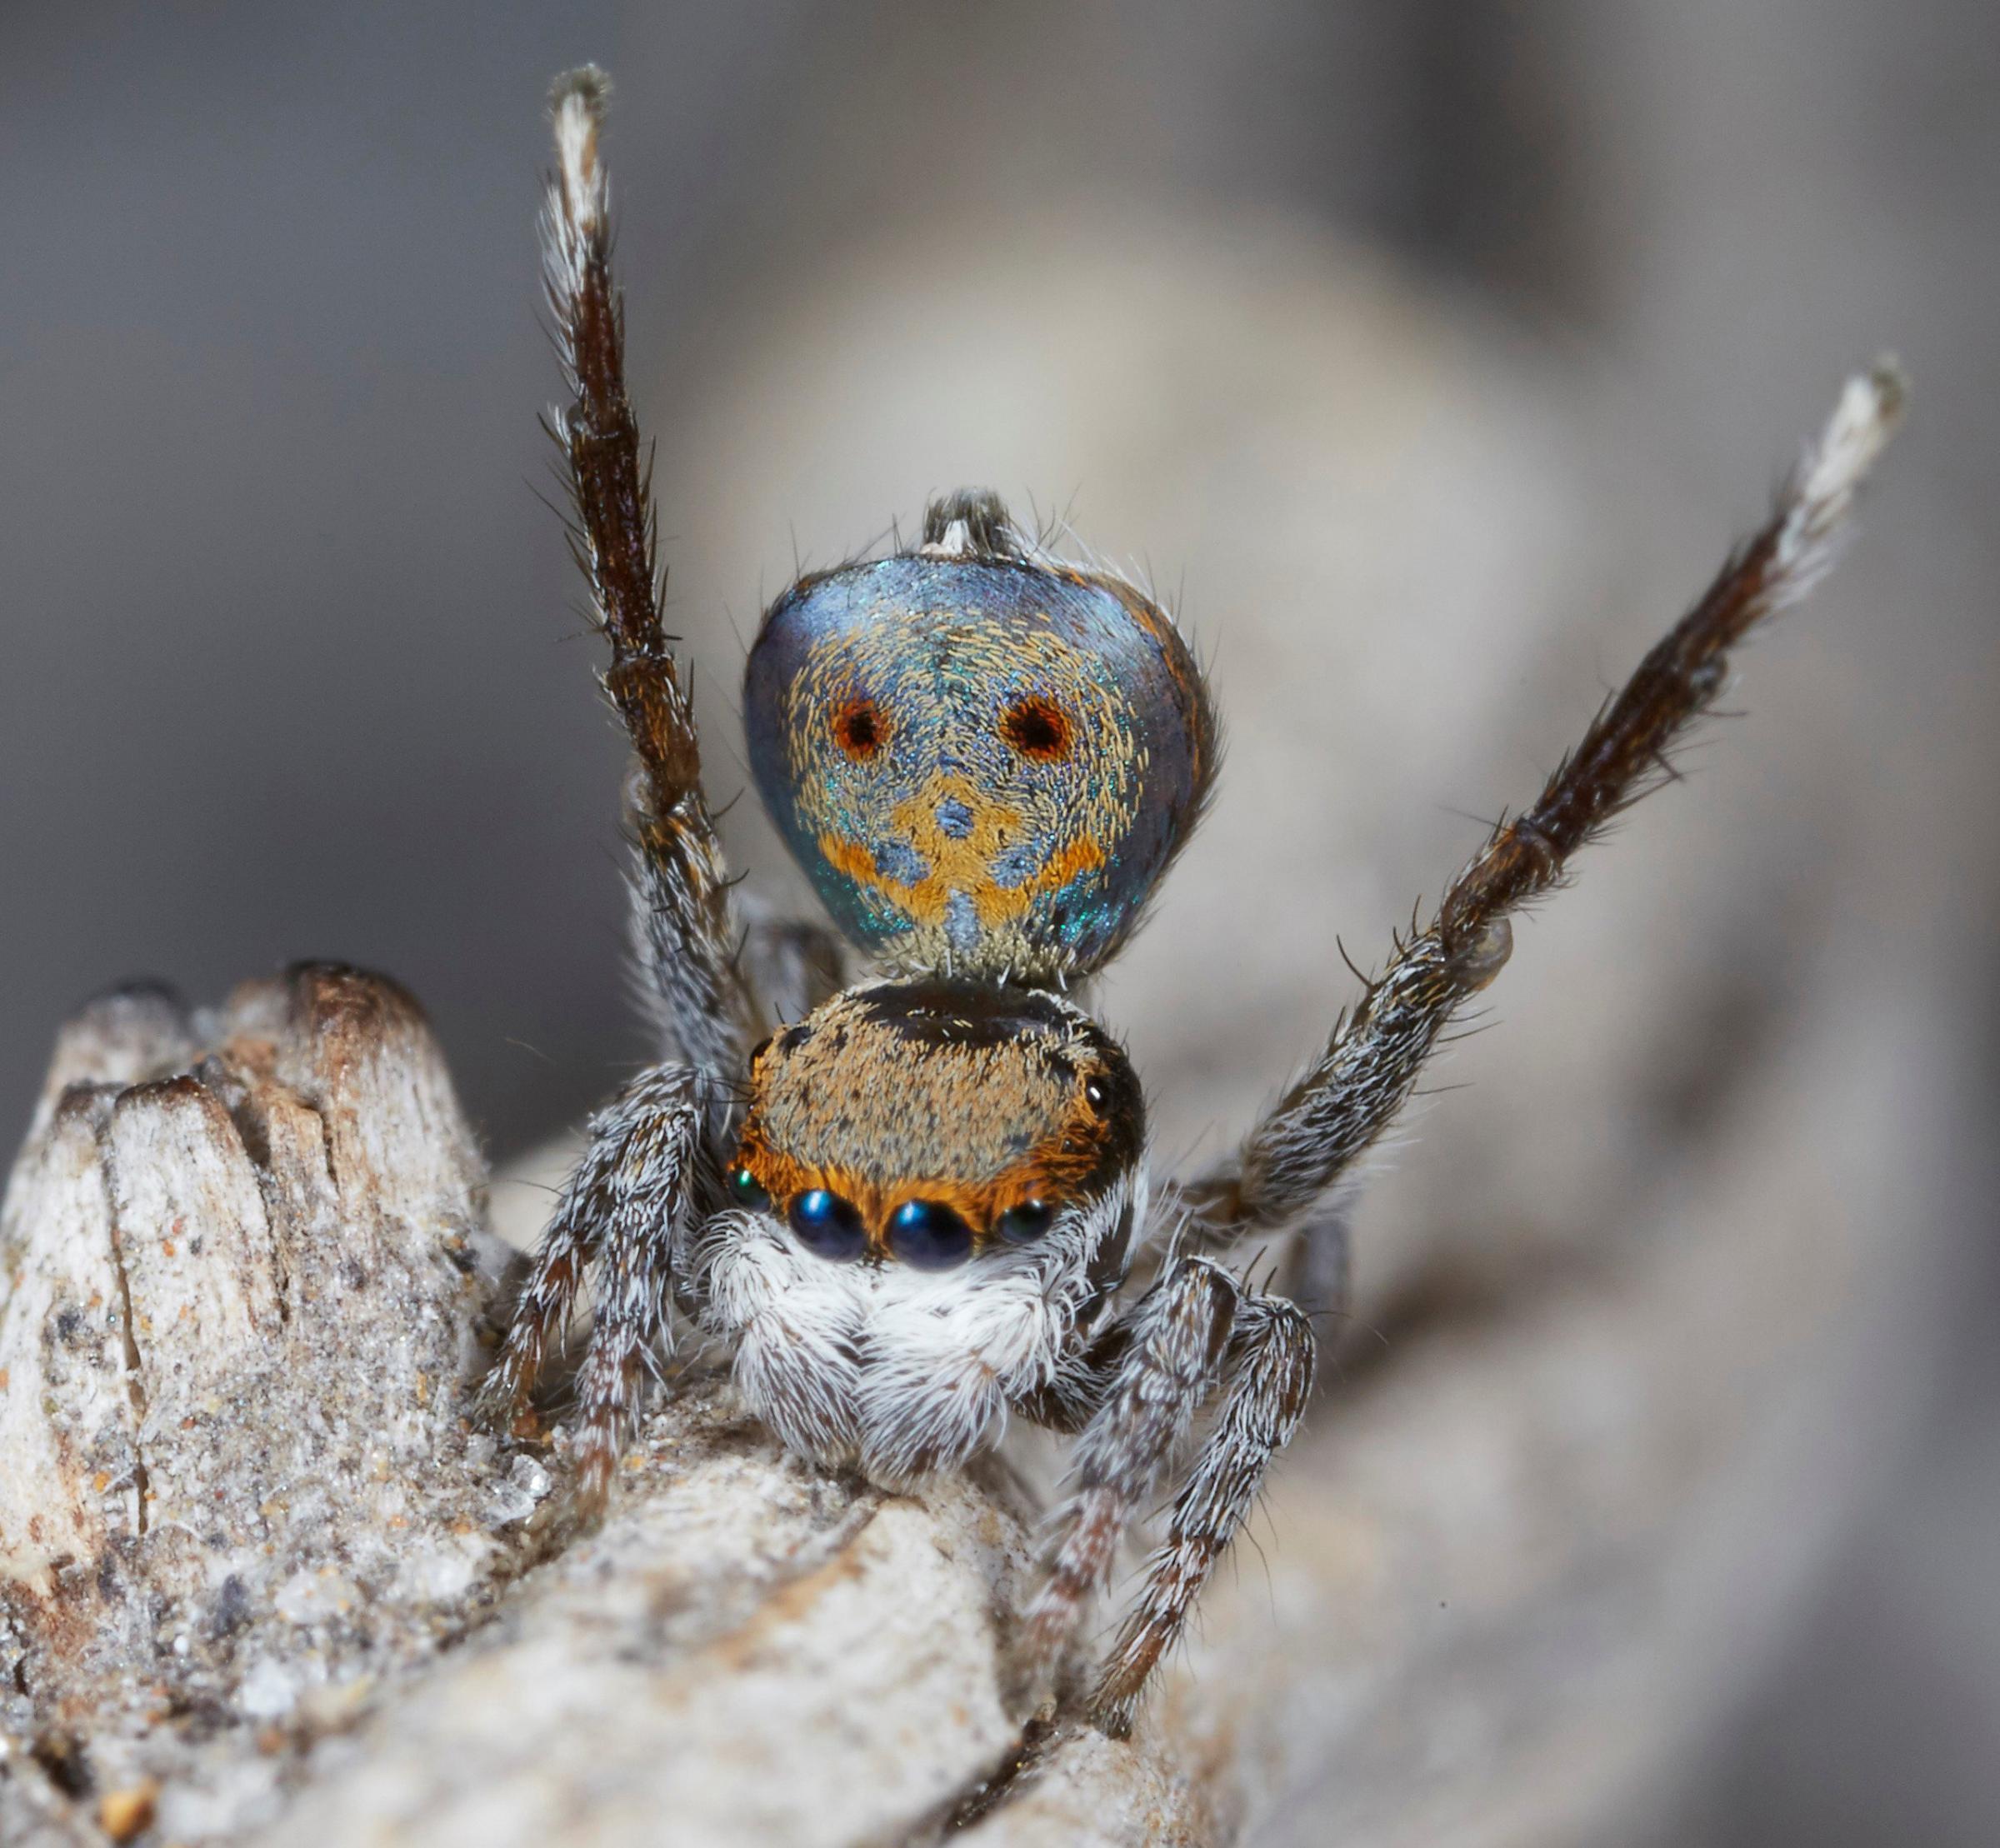 A specimen of the newly-discovered Australian Peacock Spider, Maratus Vultus, shows off his colourful abdomen in this undated picture from Australia